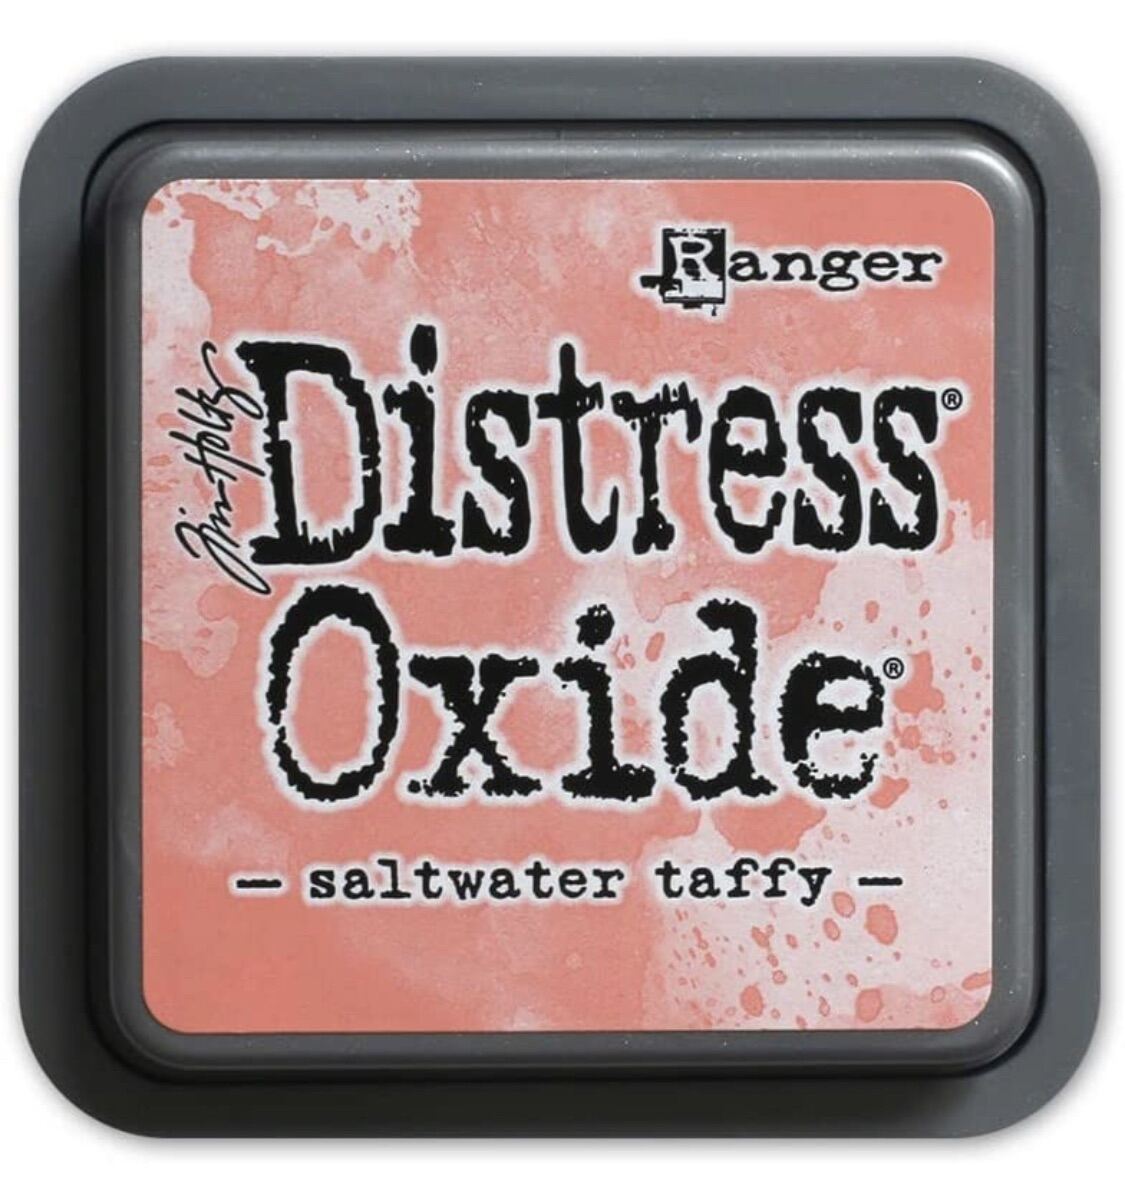 Tim Holtz Distress Crayons old color water soluble pastel set hand account  color smudge 6 colors